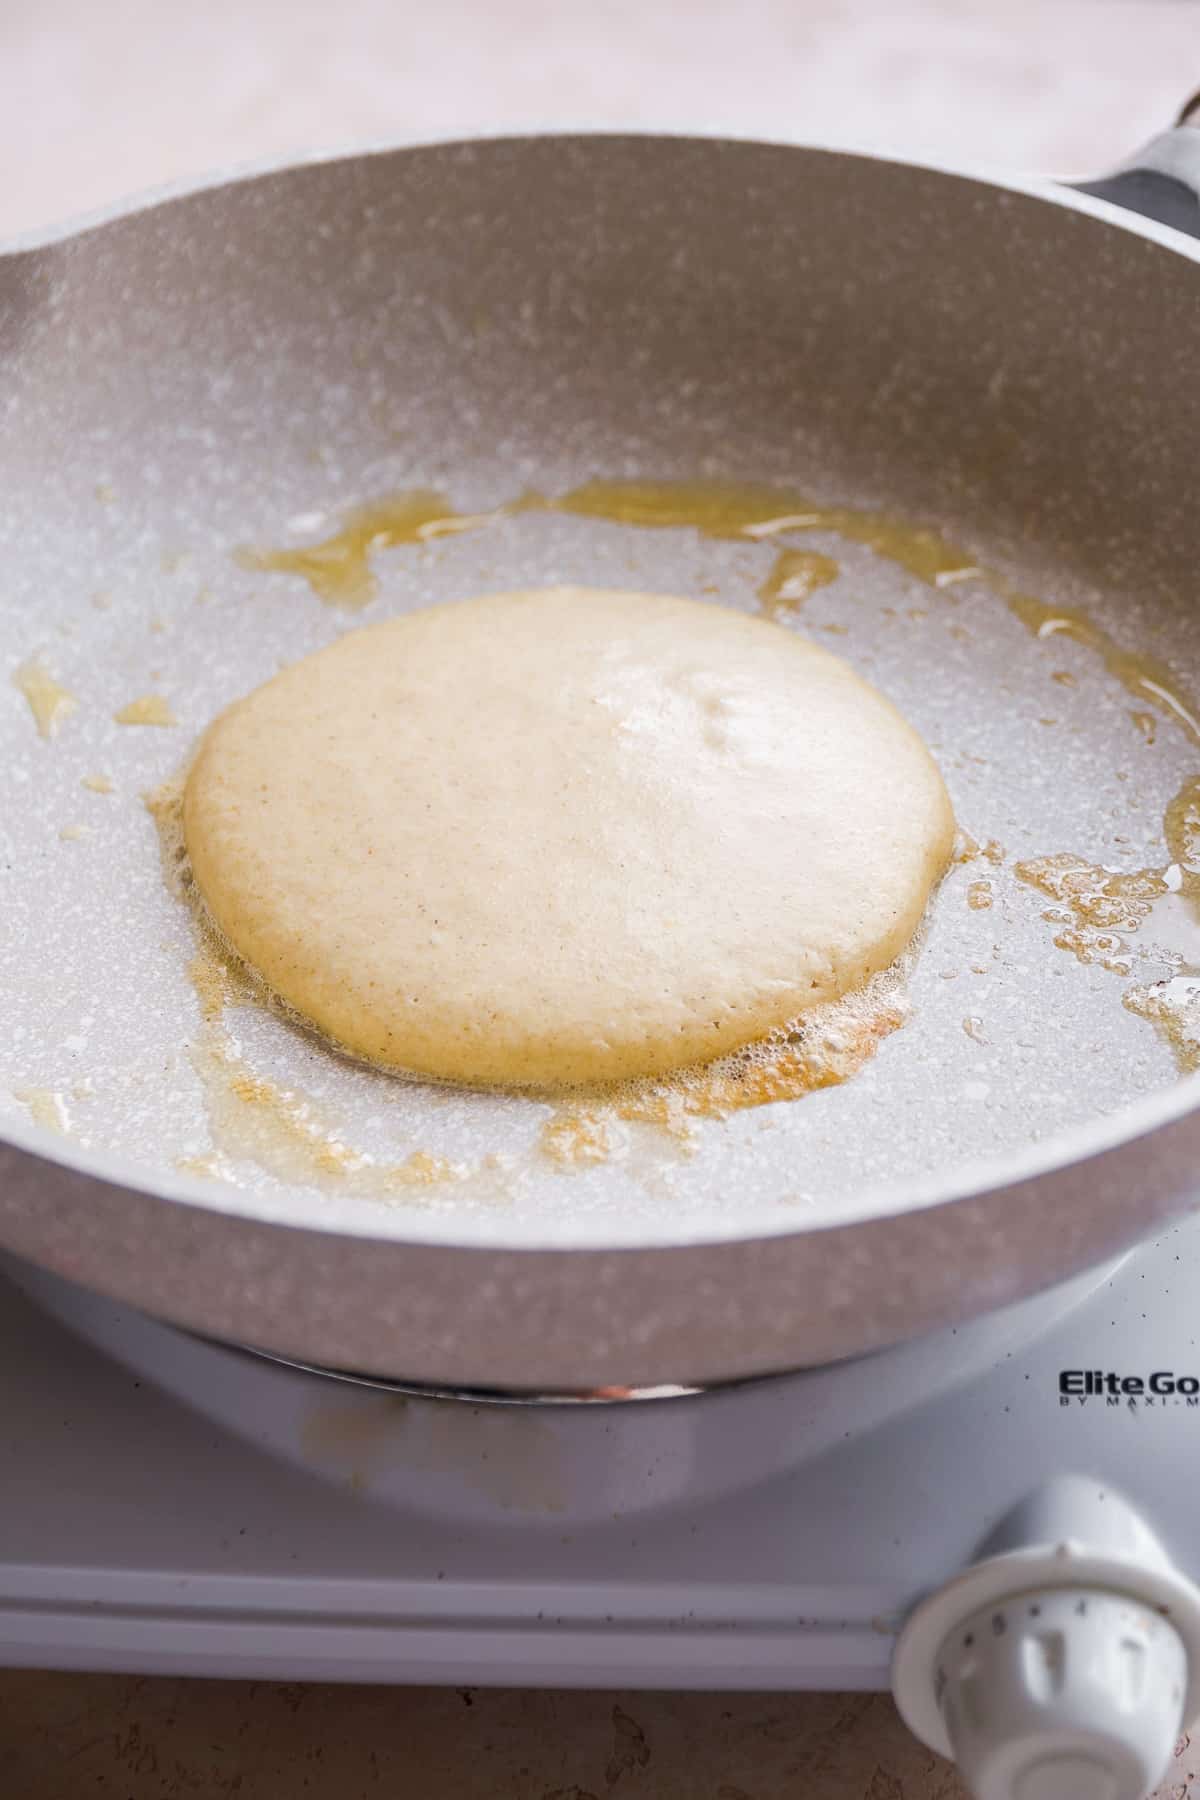 Pancake being cooked on a gray skillet.